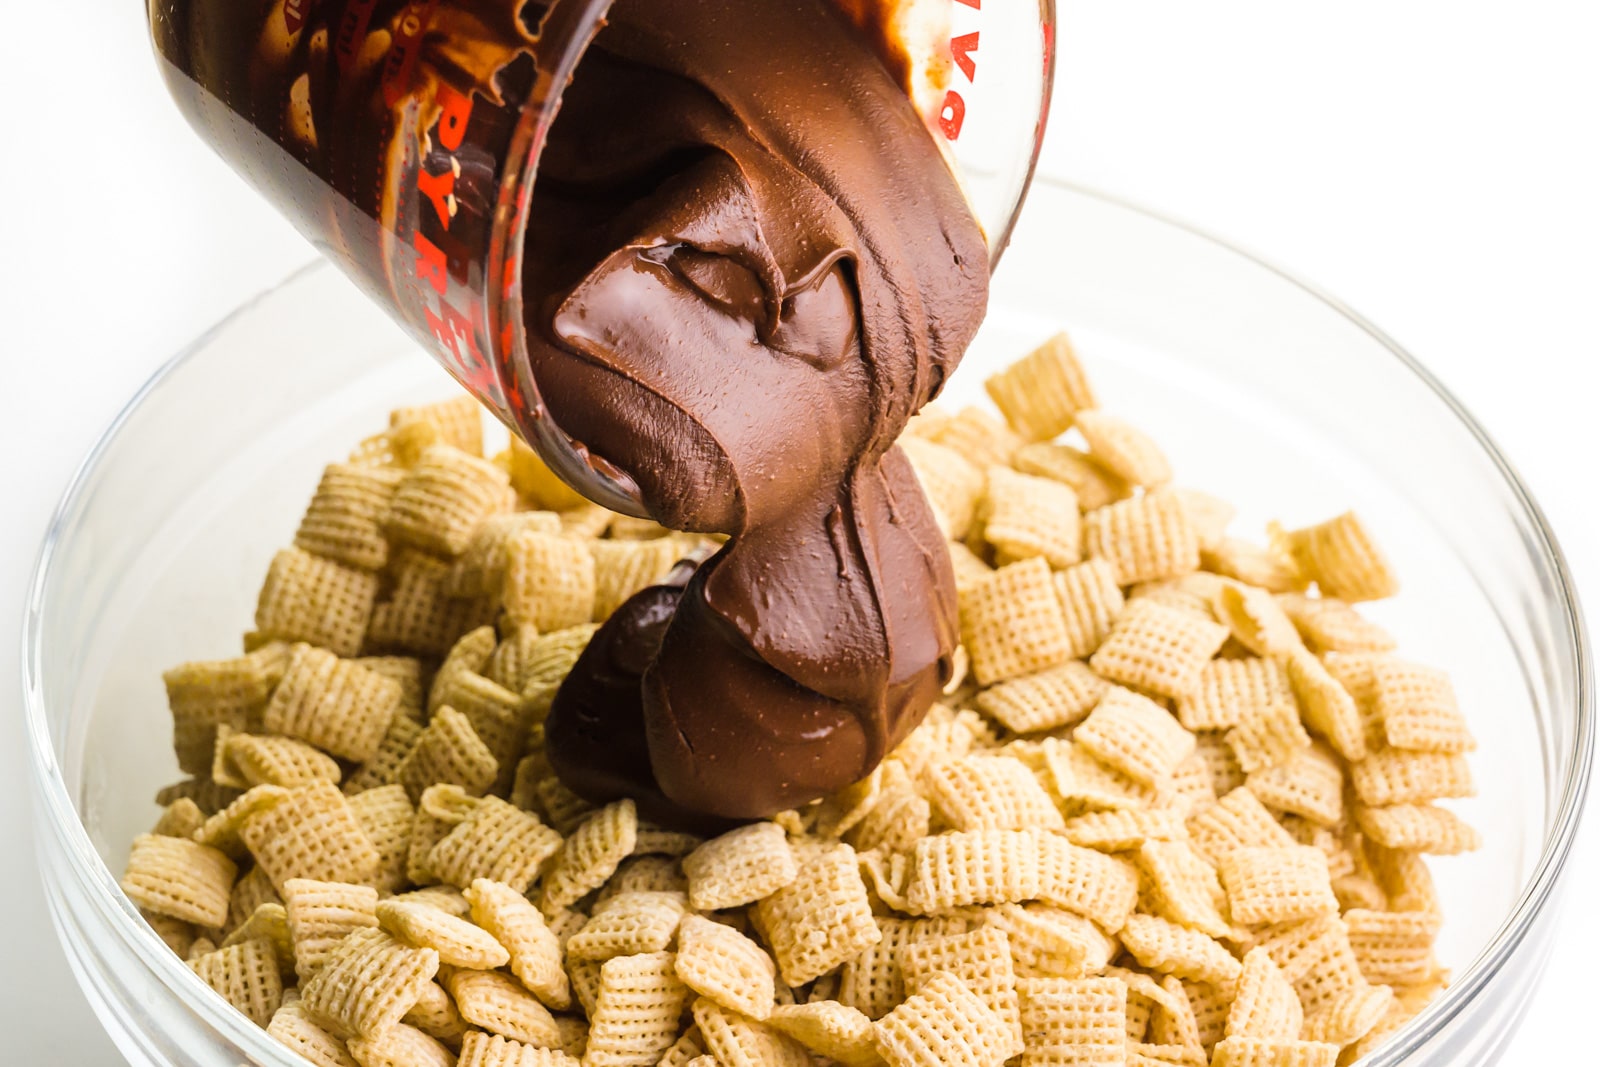 A chocolate mixture is being poured into a bowl full of Chex cereal.